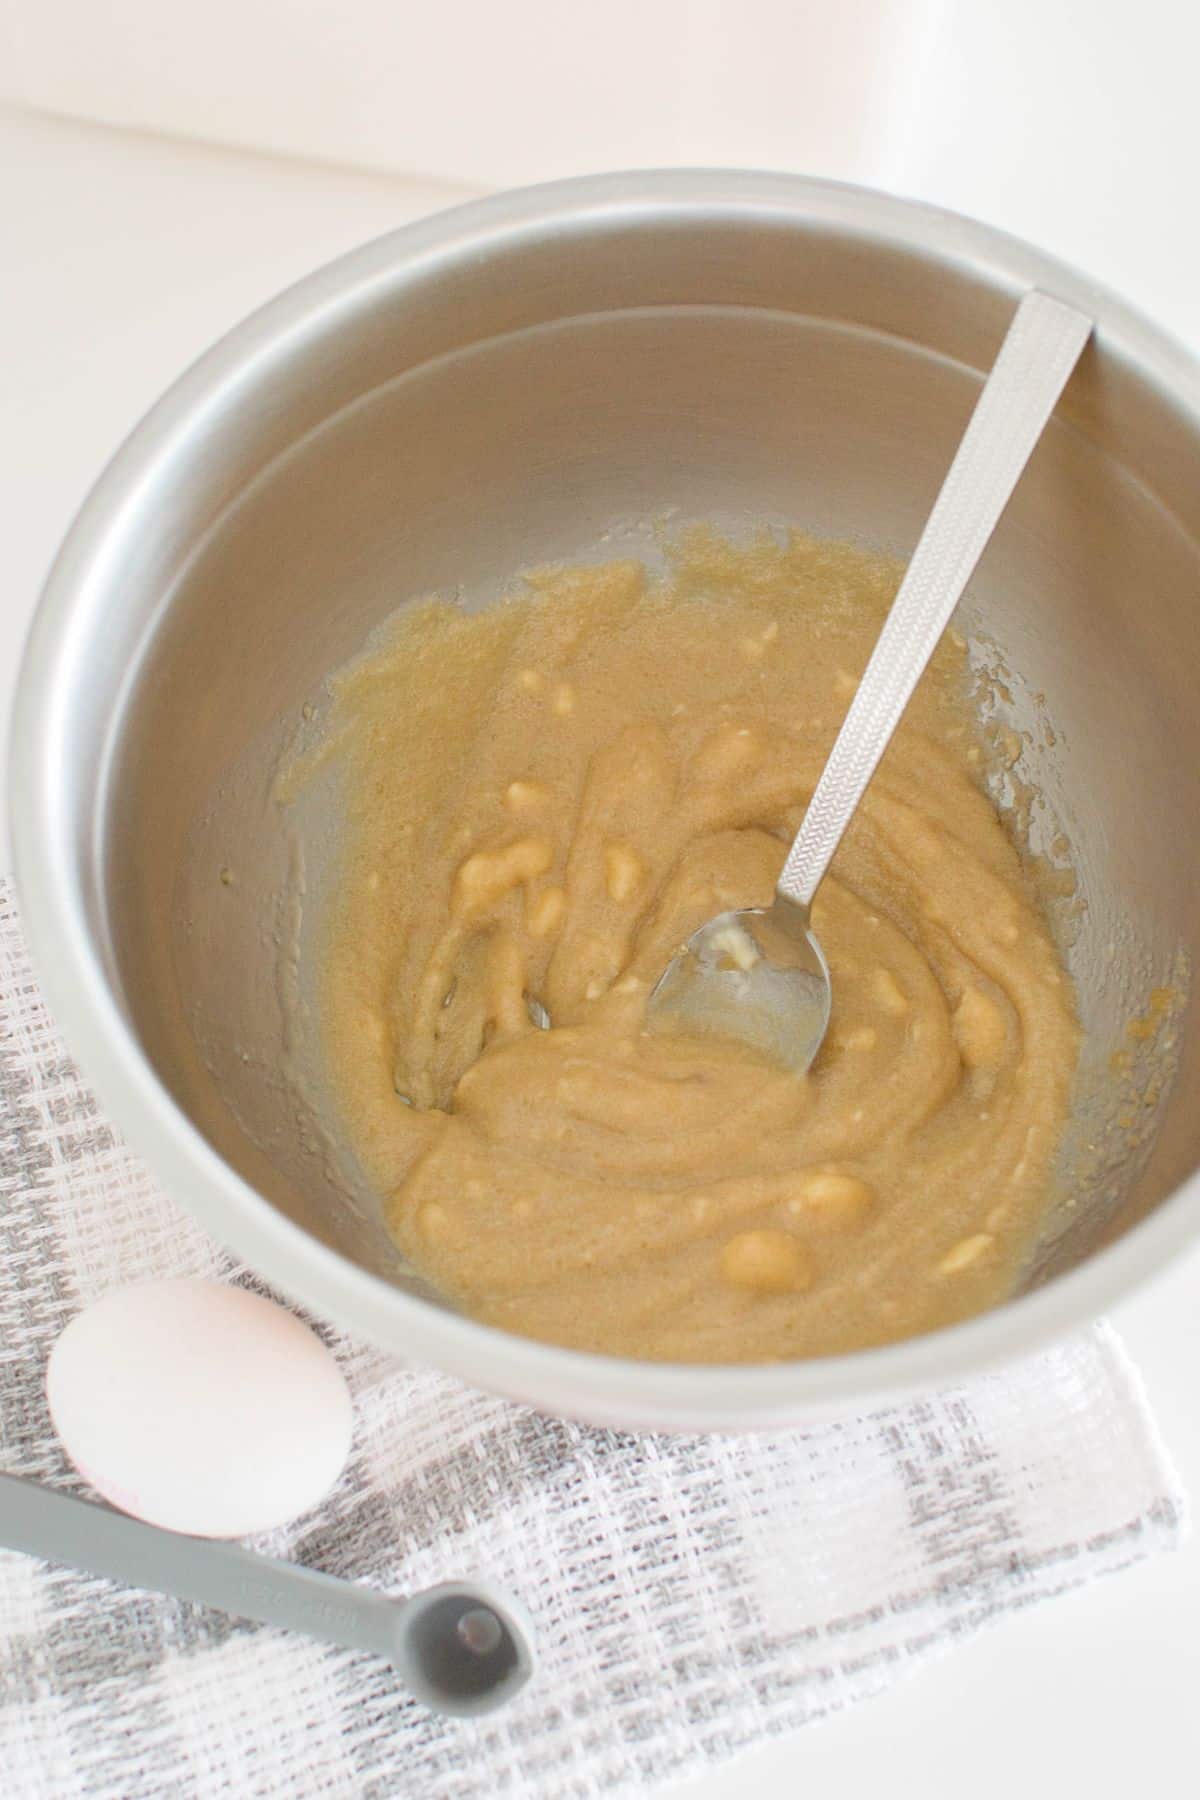 Butter and brown sugar were beaten together in a large bowl with spoon.